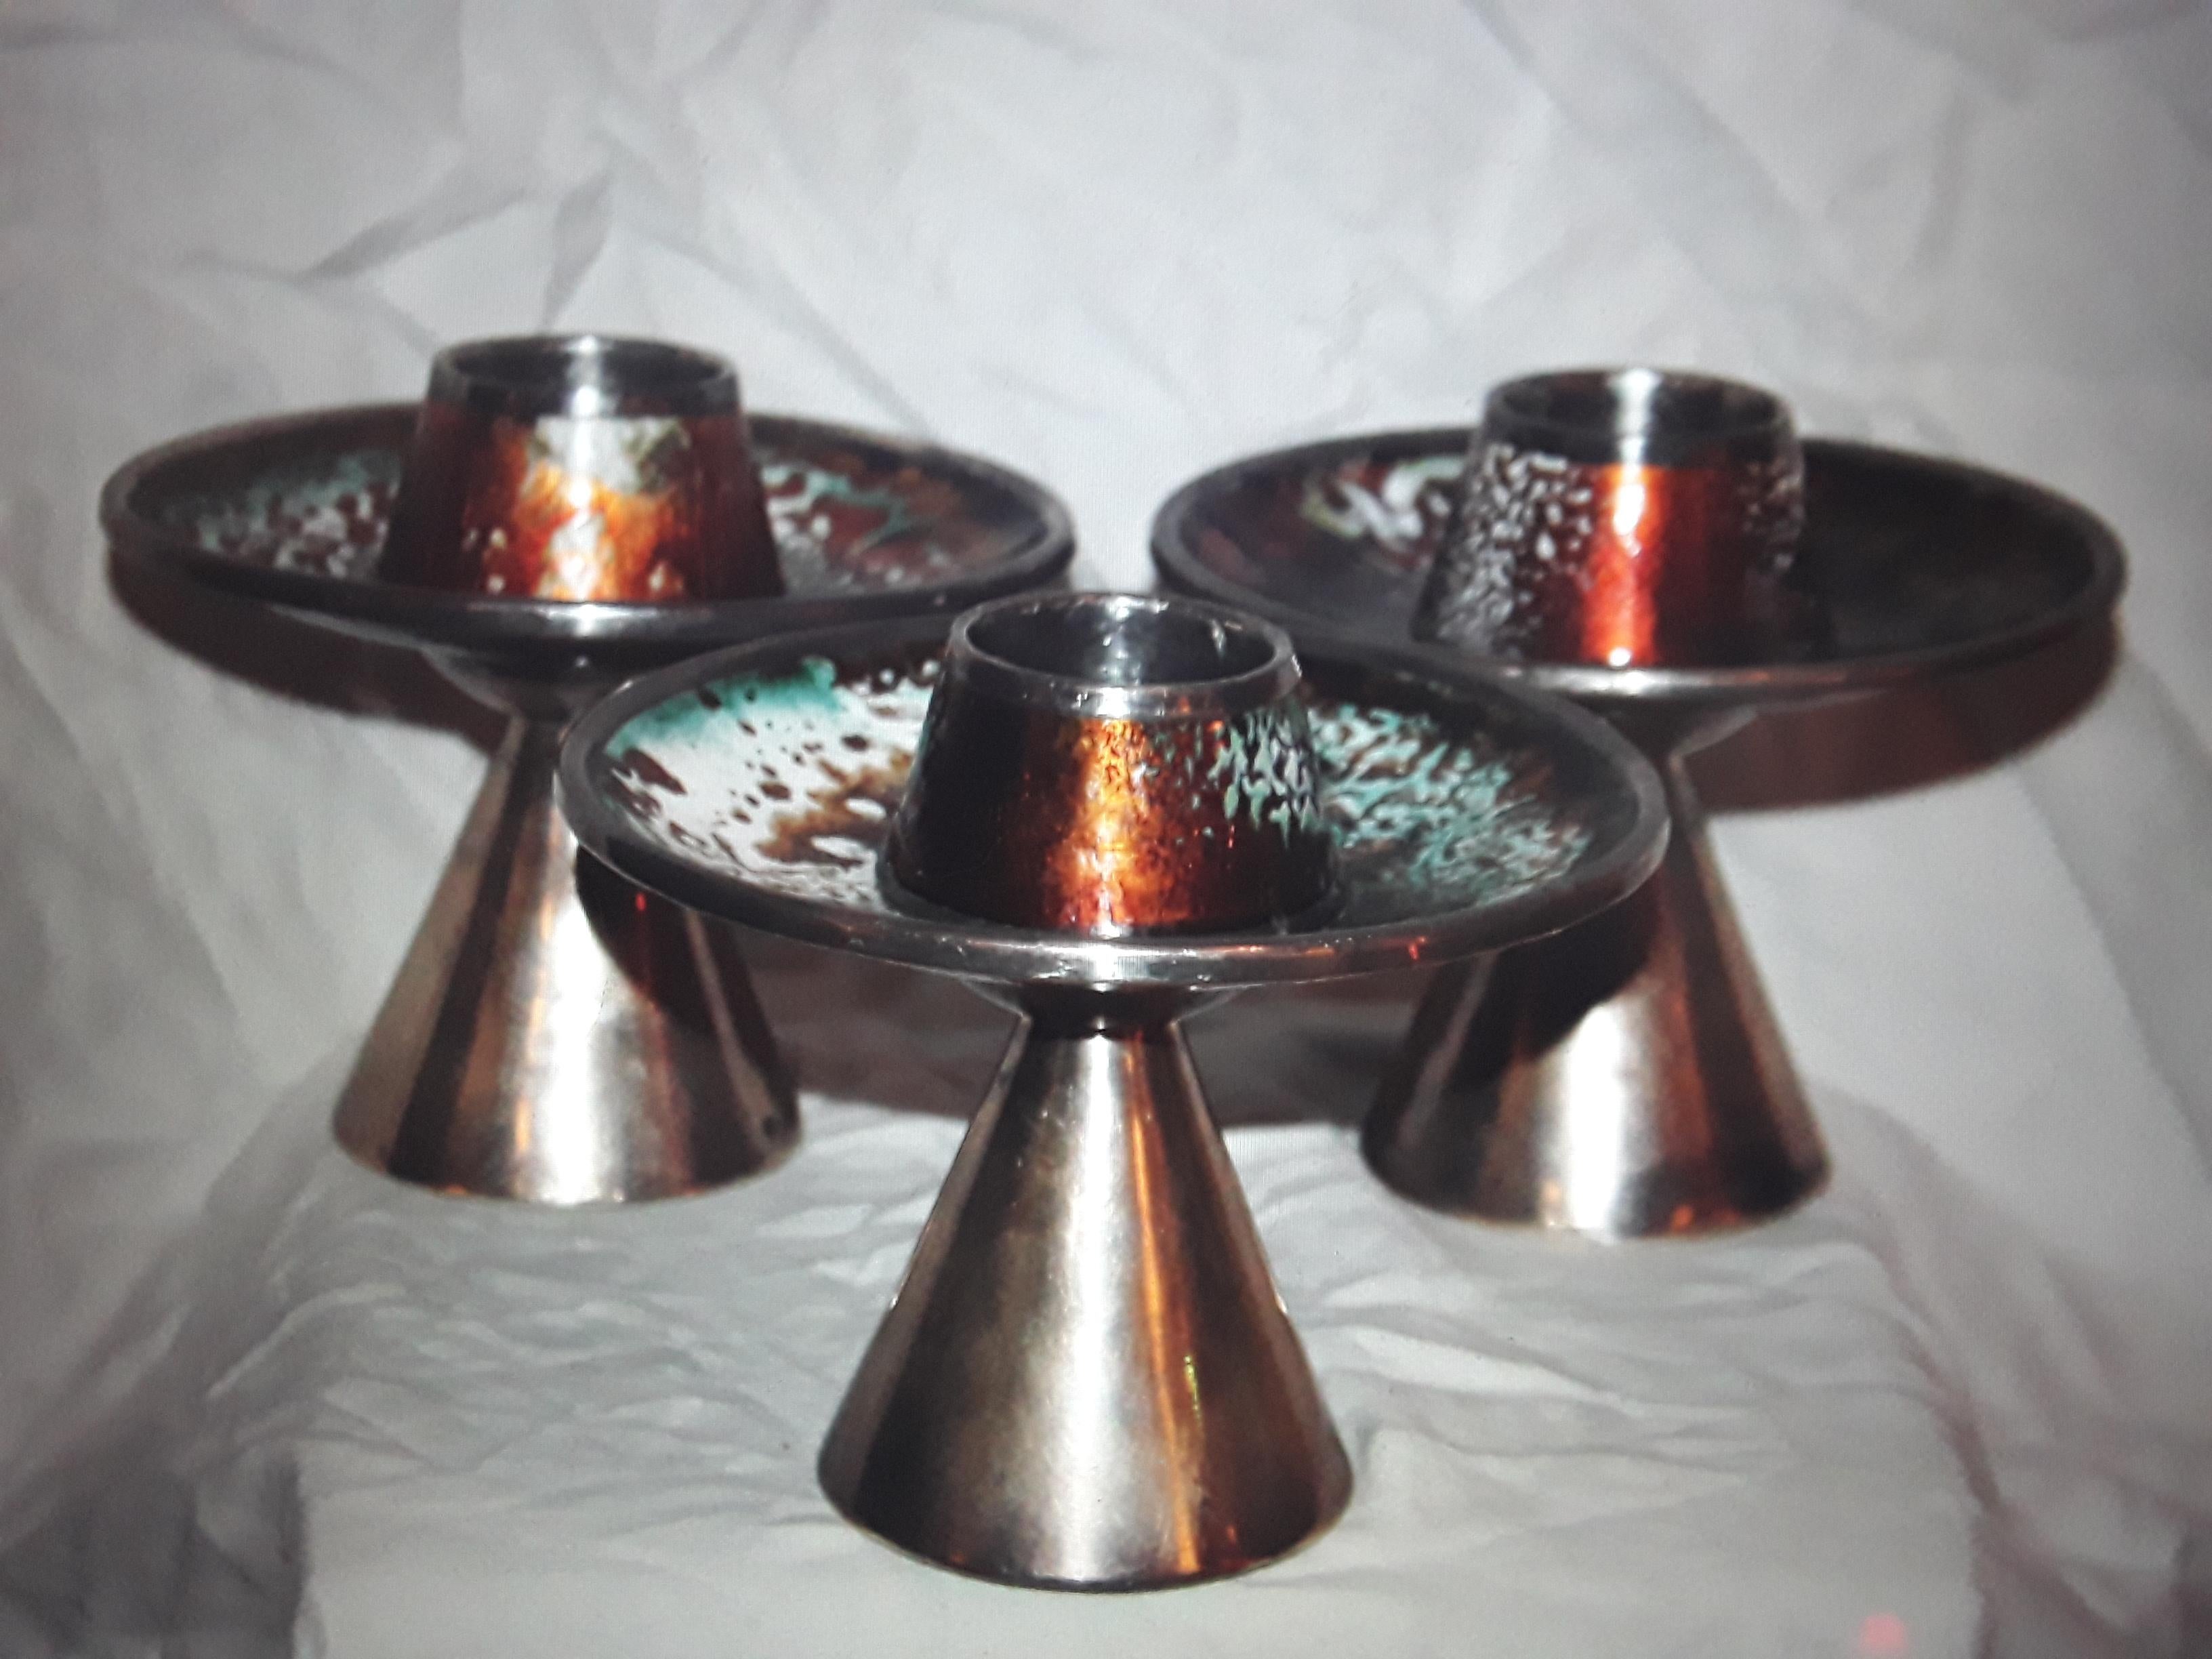 c1930's French Modern style Futuristic Enamelled Candlesticks. Boldly marked Bagues. These are a very rare form from Bagues.